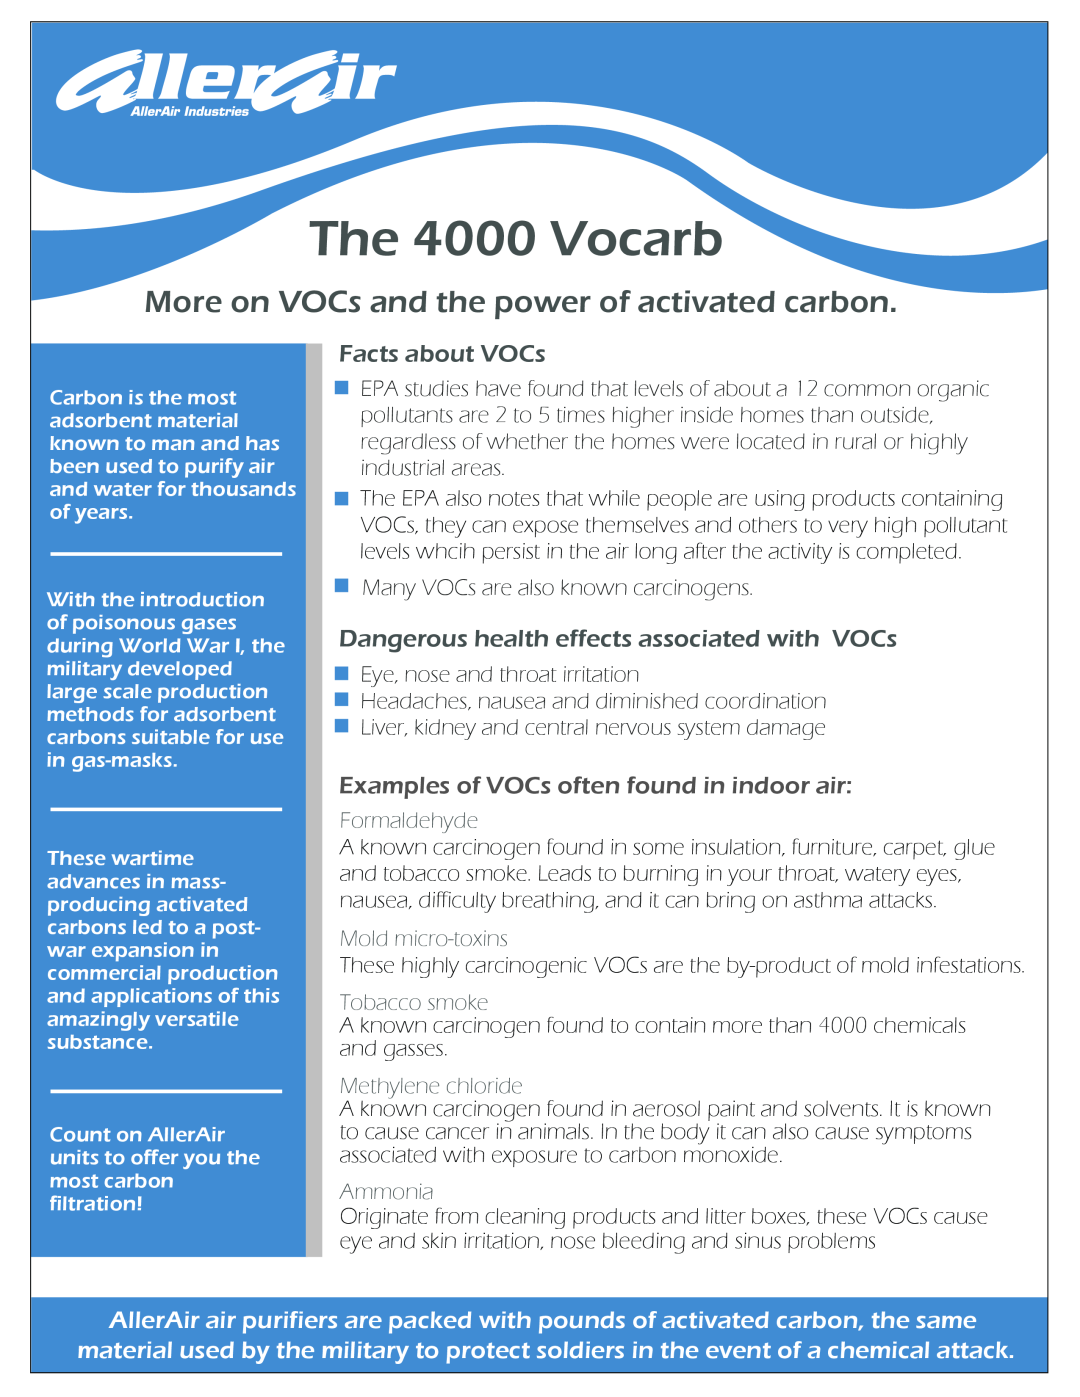 AllerAir More on VOCs and the power of activated carbon, Facts about VOCs, The 4000 Vocarb, Formaldehyde, Tobacco smoke 